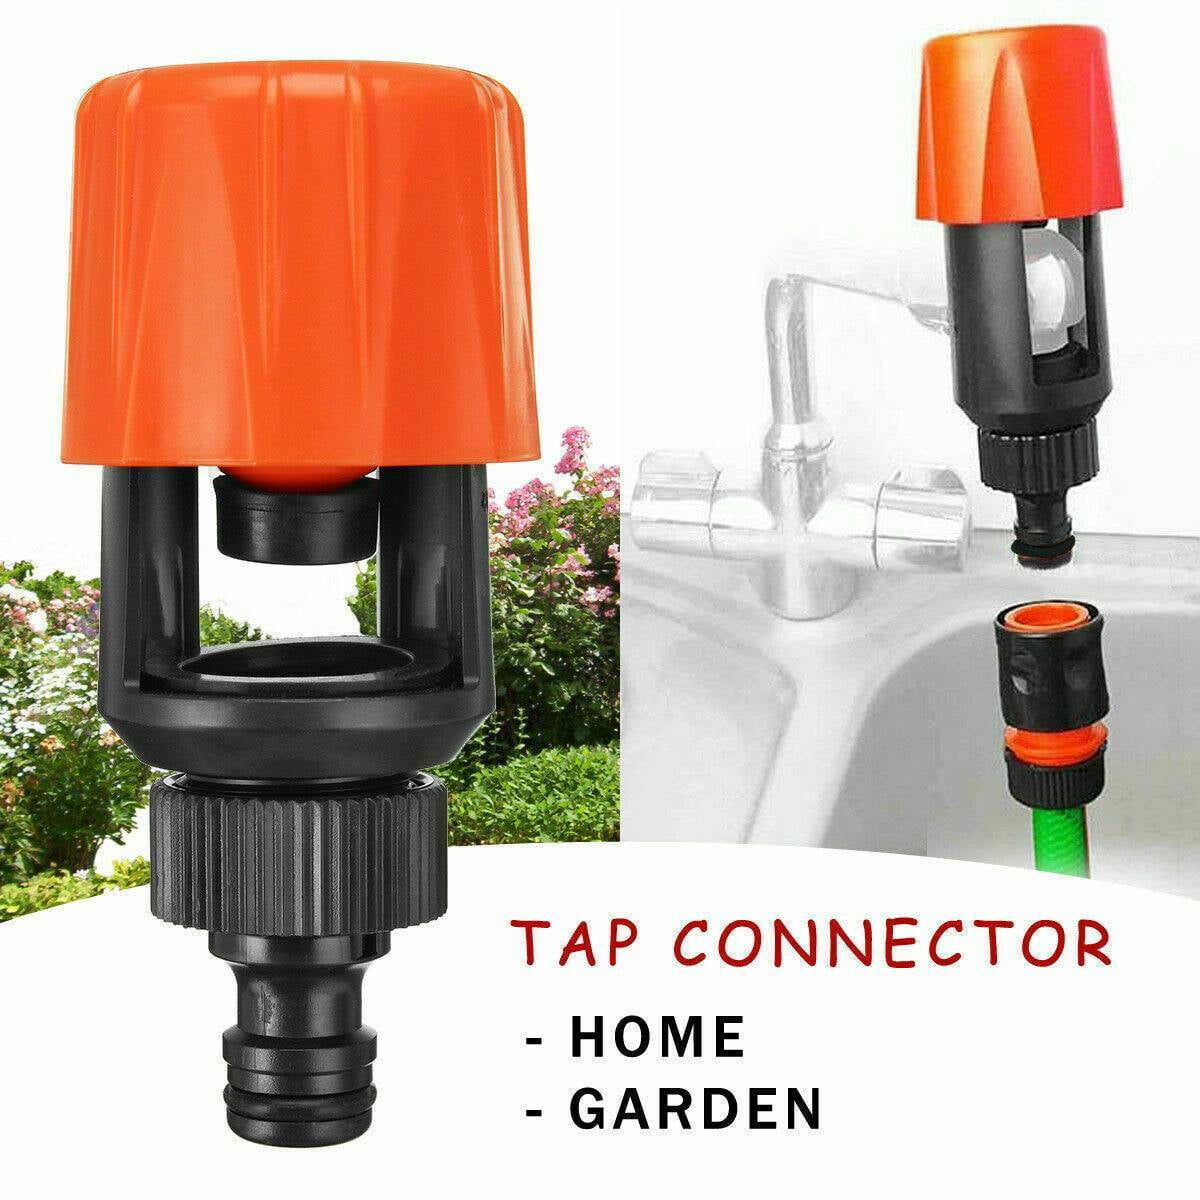 Universal Tap Connector Adapter Mixer Kitchen Garden Hose Pipe Household